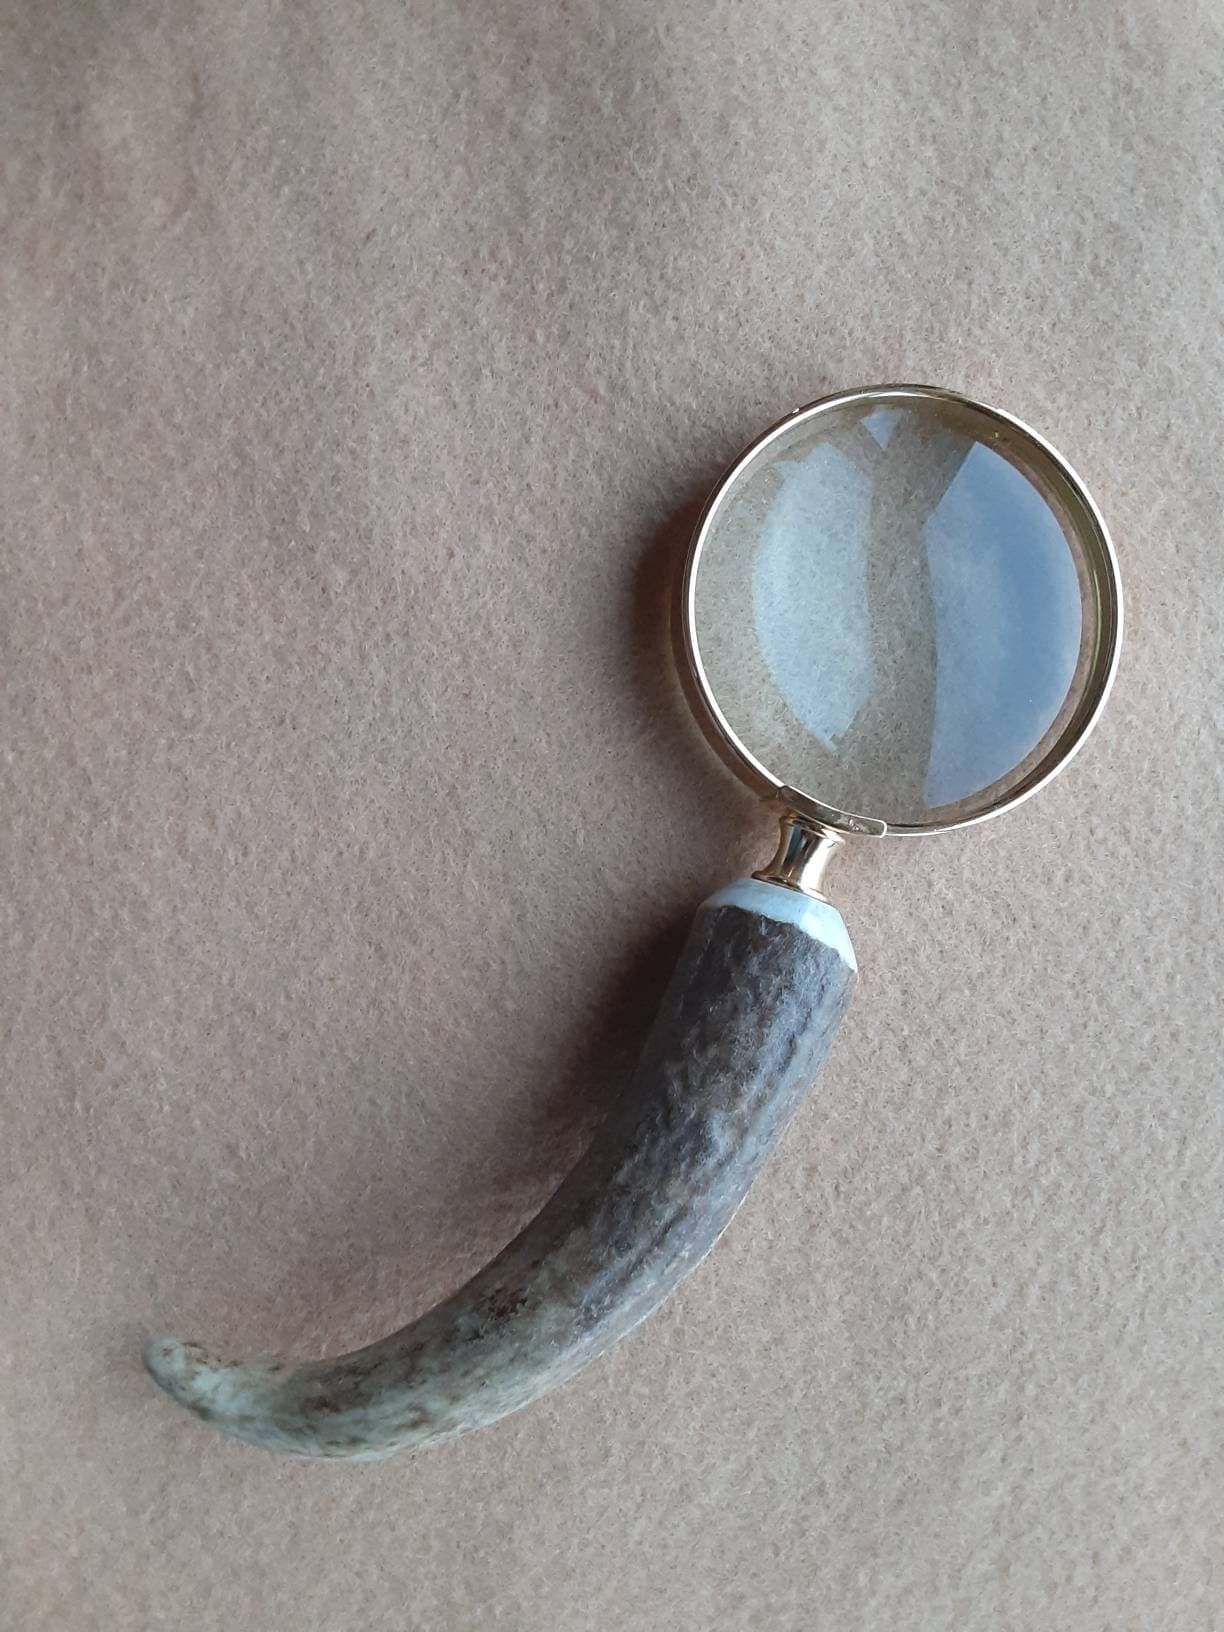 Large Antique Stag Antler / Horn Handle Magnifying Glass